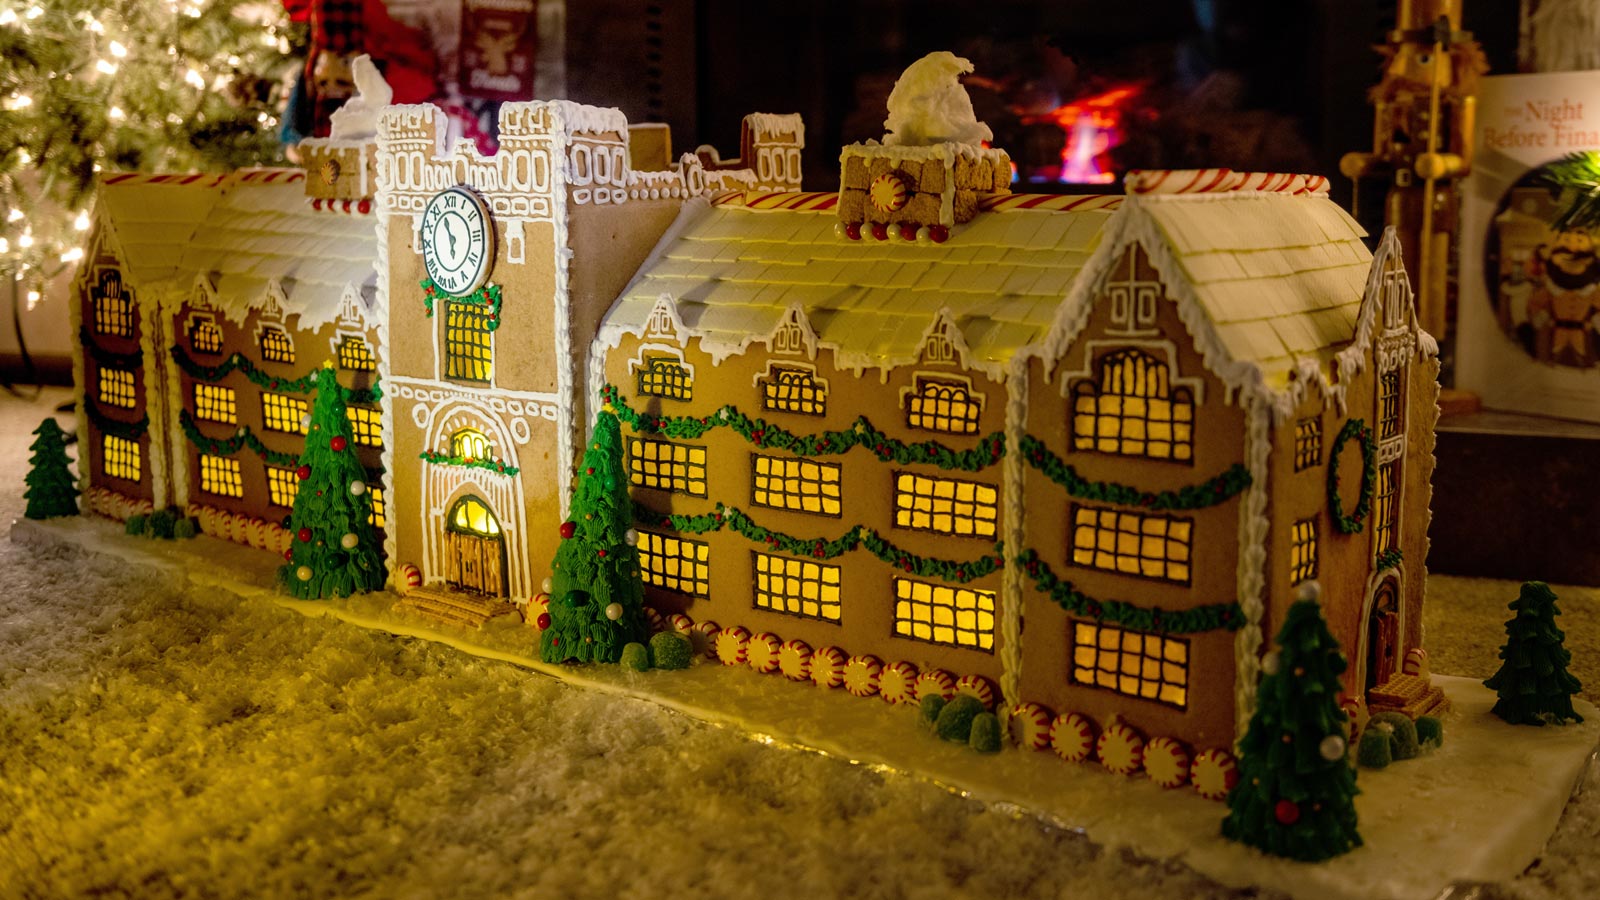 The Administration Building made out of gingerbread, frosting and other sweet treats.